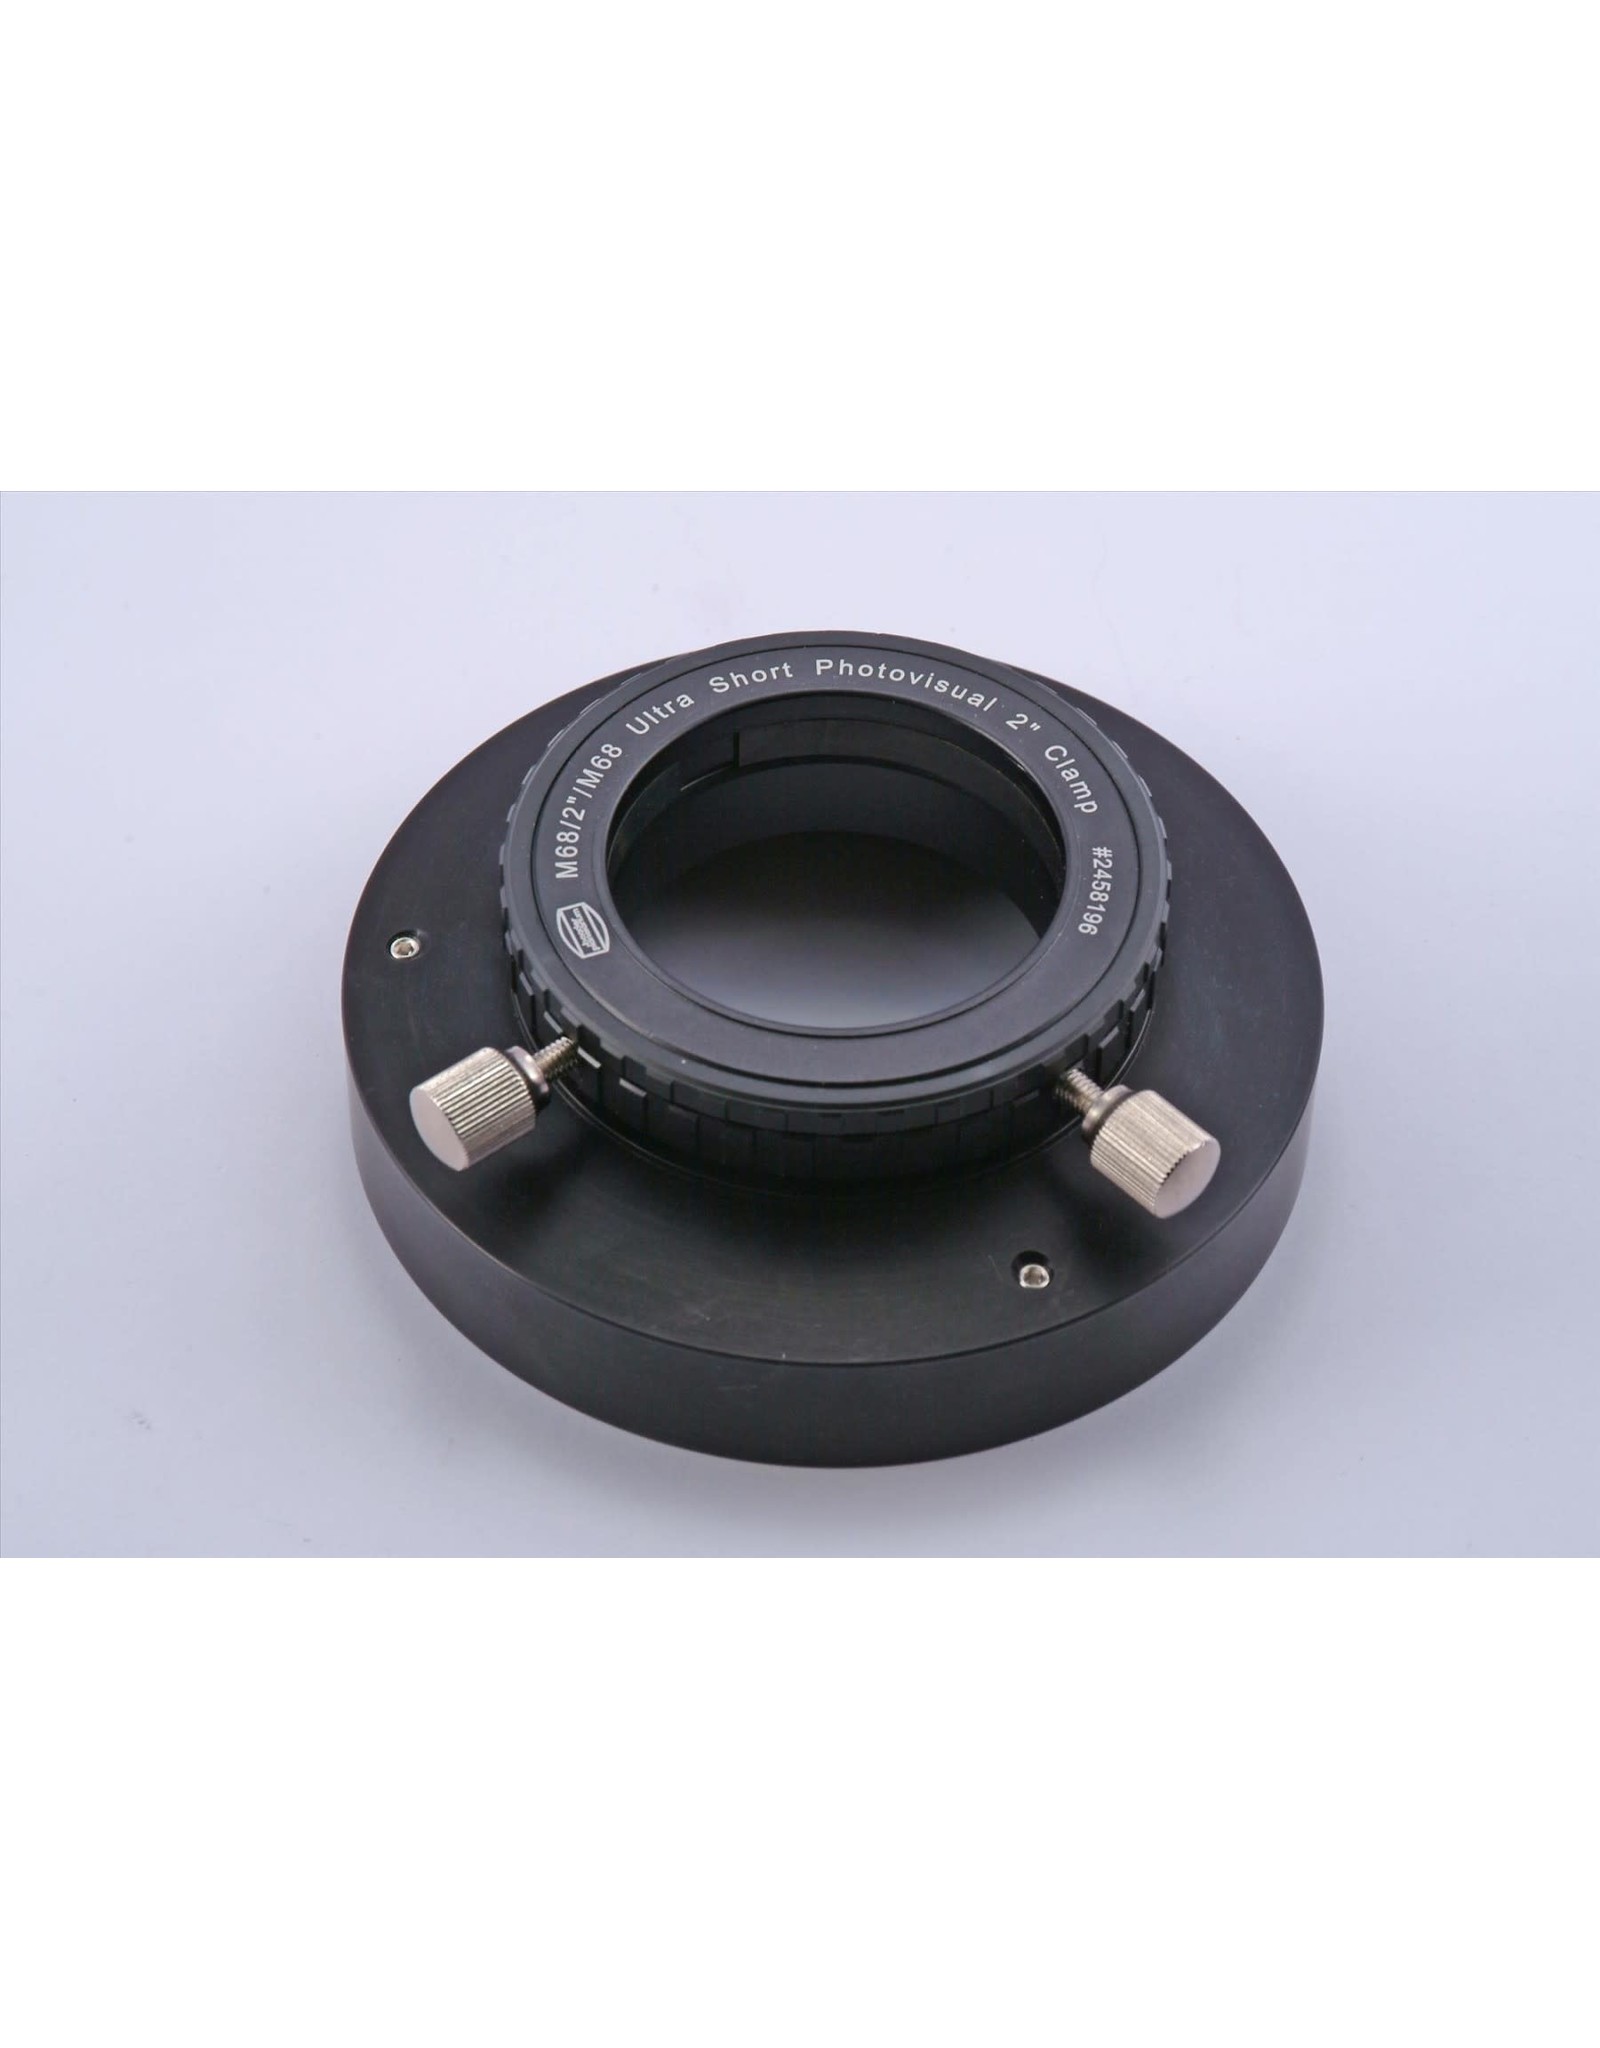 Baader Planetarium Baader Adapter 4.1"i UNF/24G to M68ix1 (for TEC 140-200 and 3.5" Feathertouch focusers)